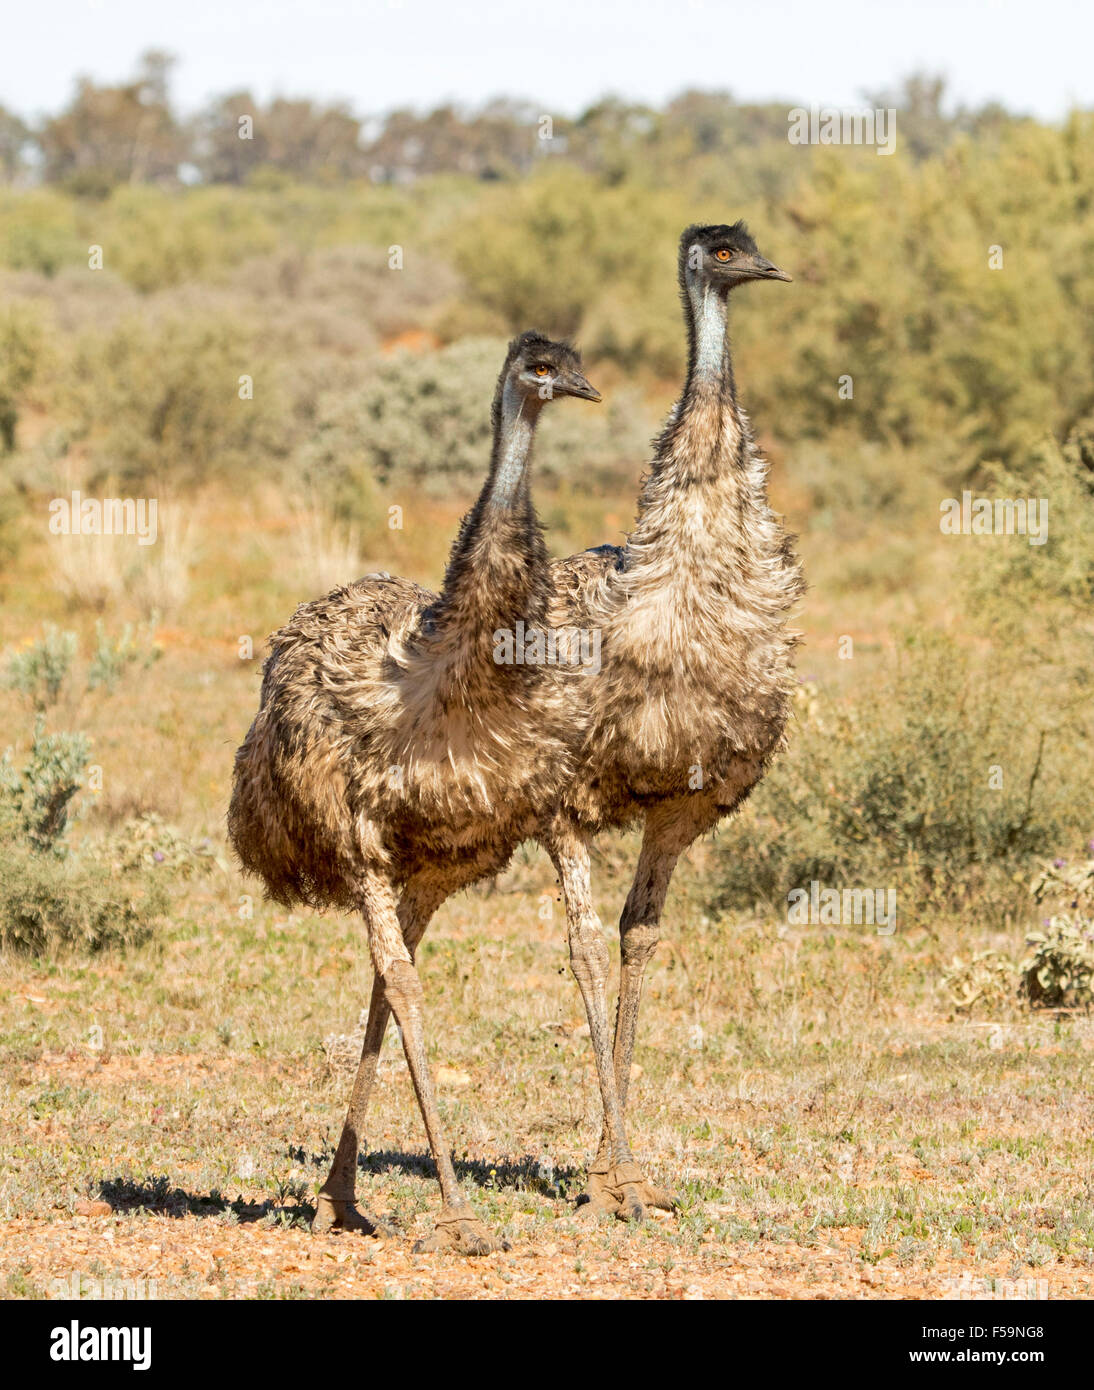 Two emus, walking side by side, in step & in identical poses like amorous couple, in the wild in outback Australia Stock Photo